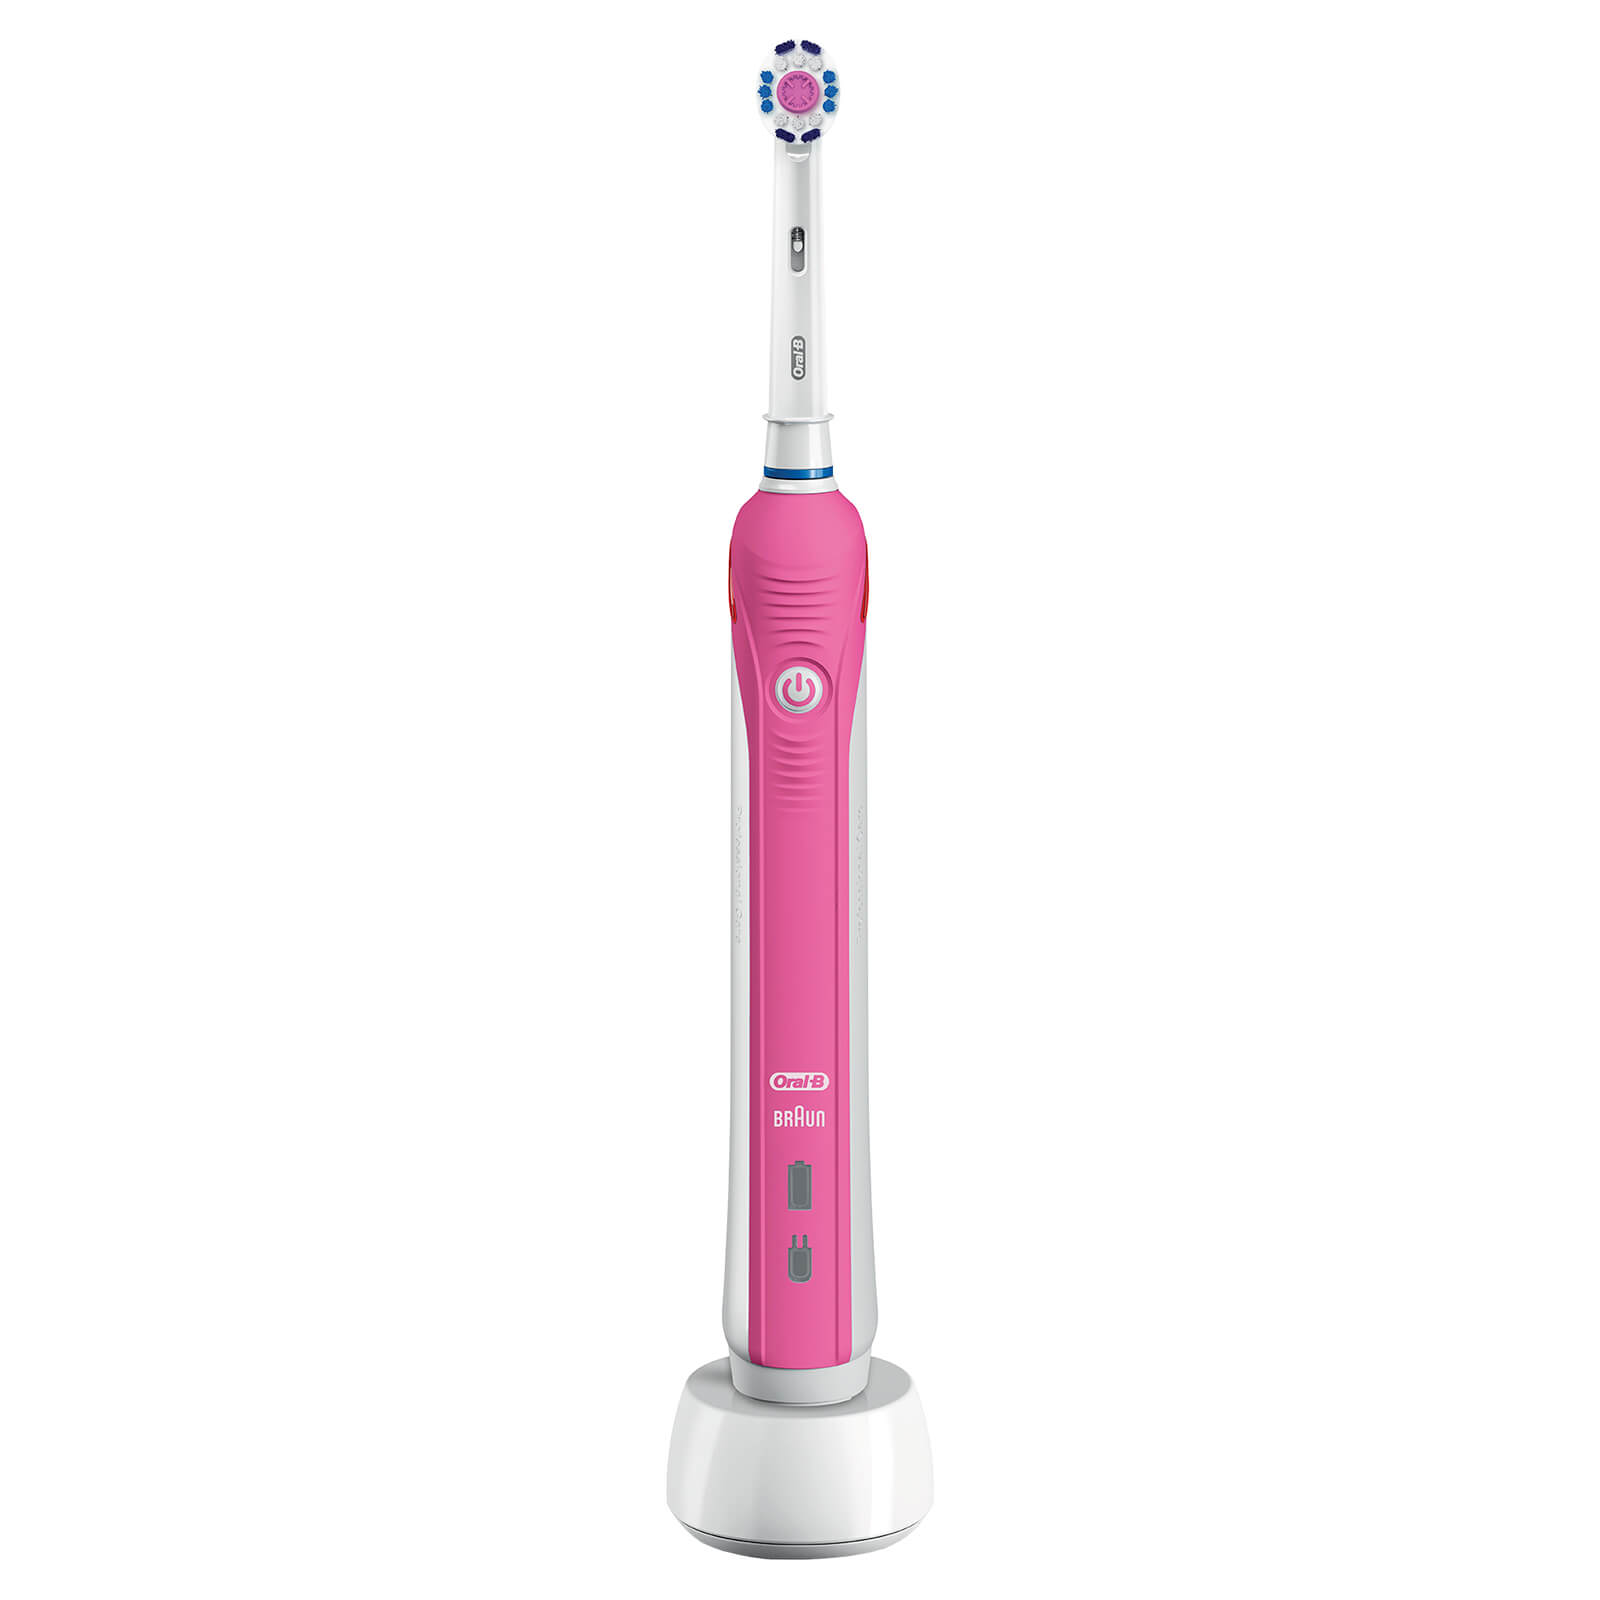 Oral B Pro 2 3D White Power Handle Electric Toothbrush - Pink